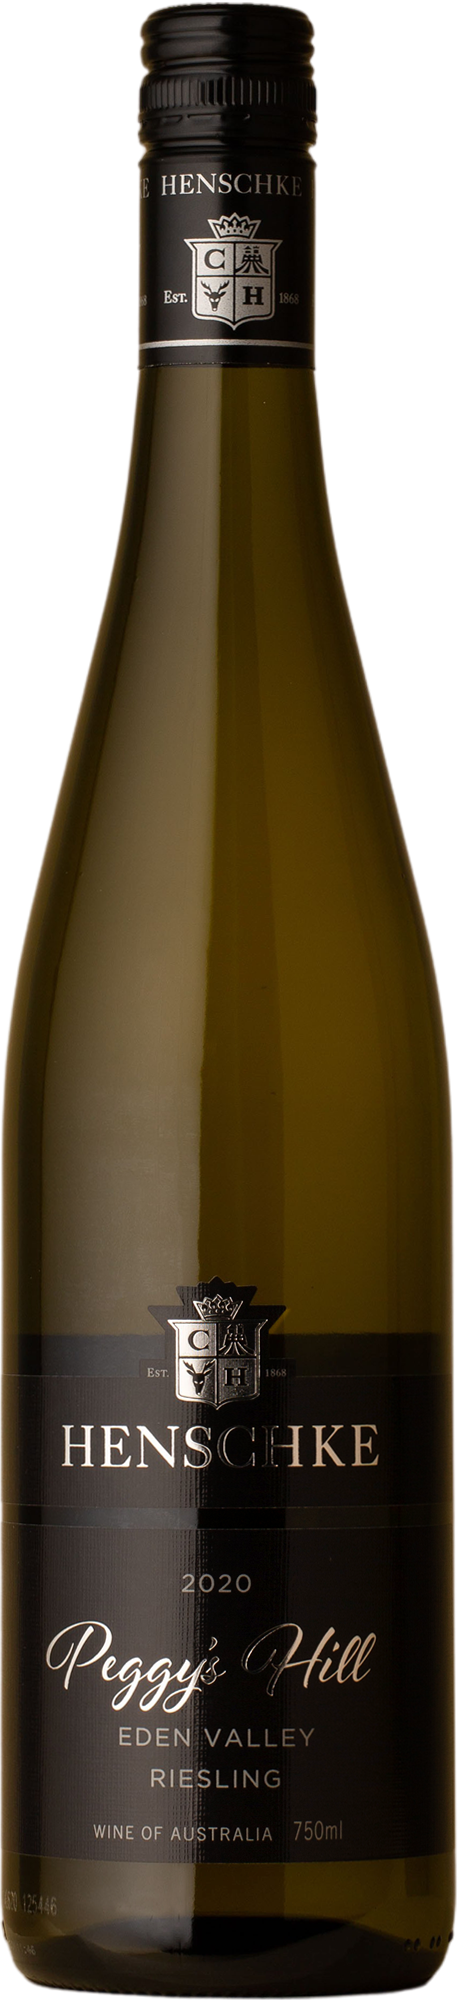 Henschke - Peggys Hill Riesling 2020 White Wine